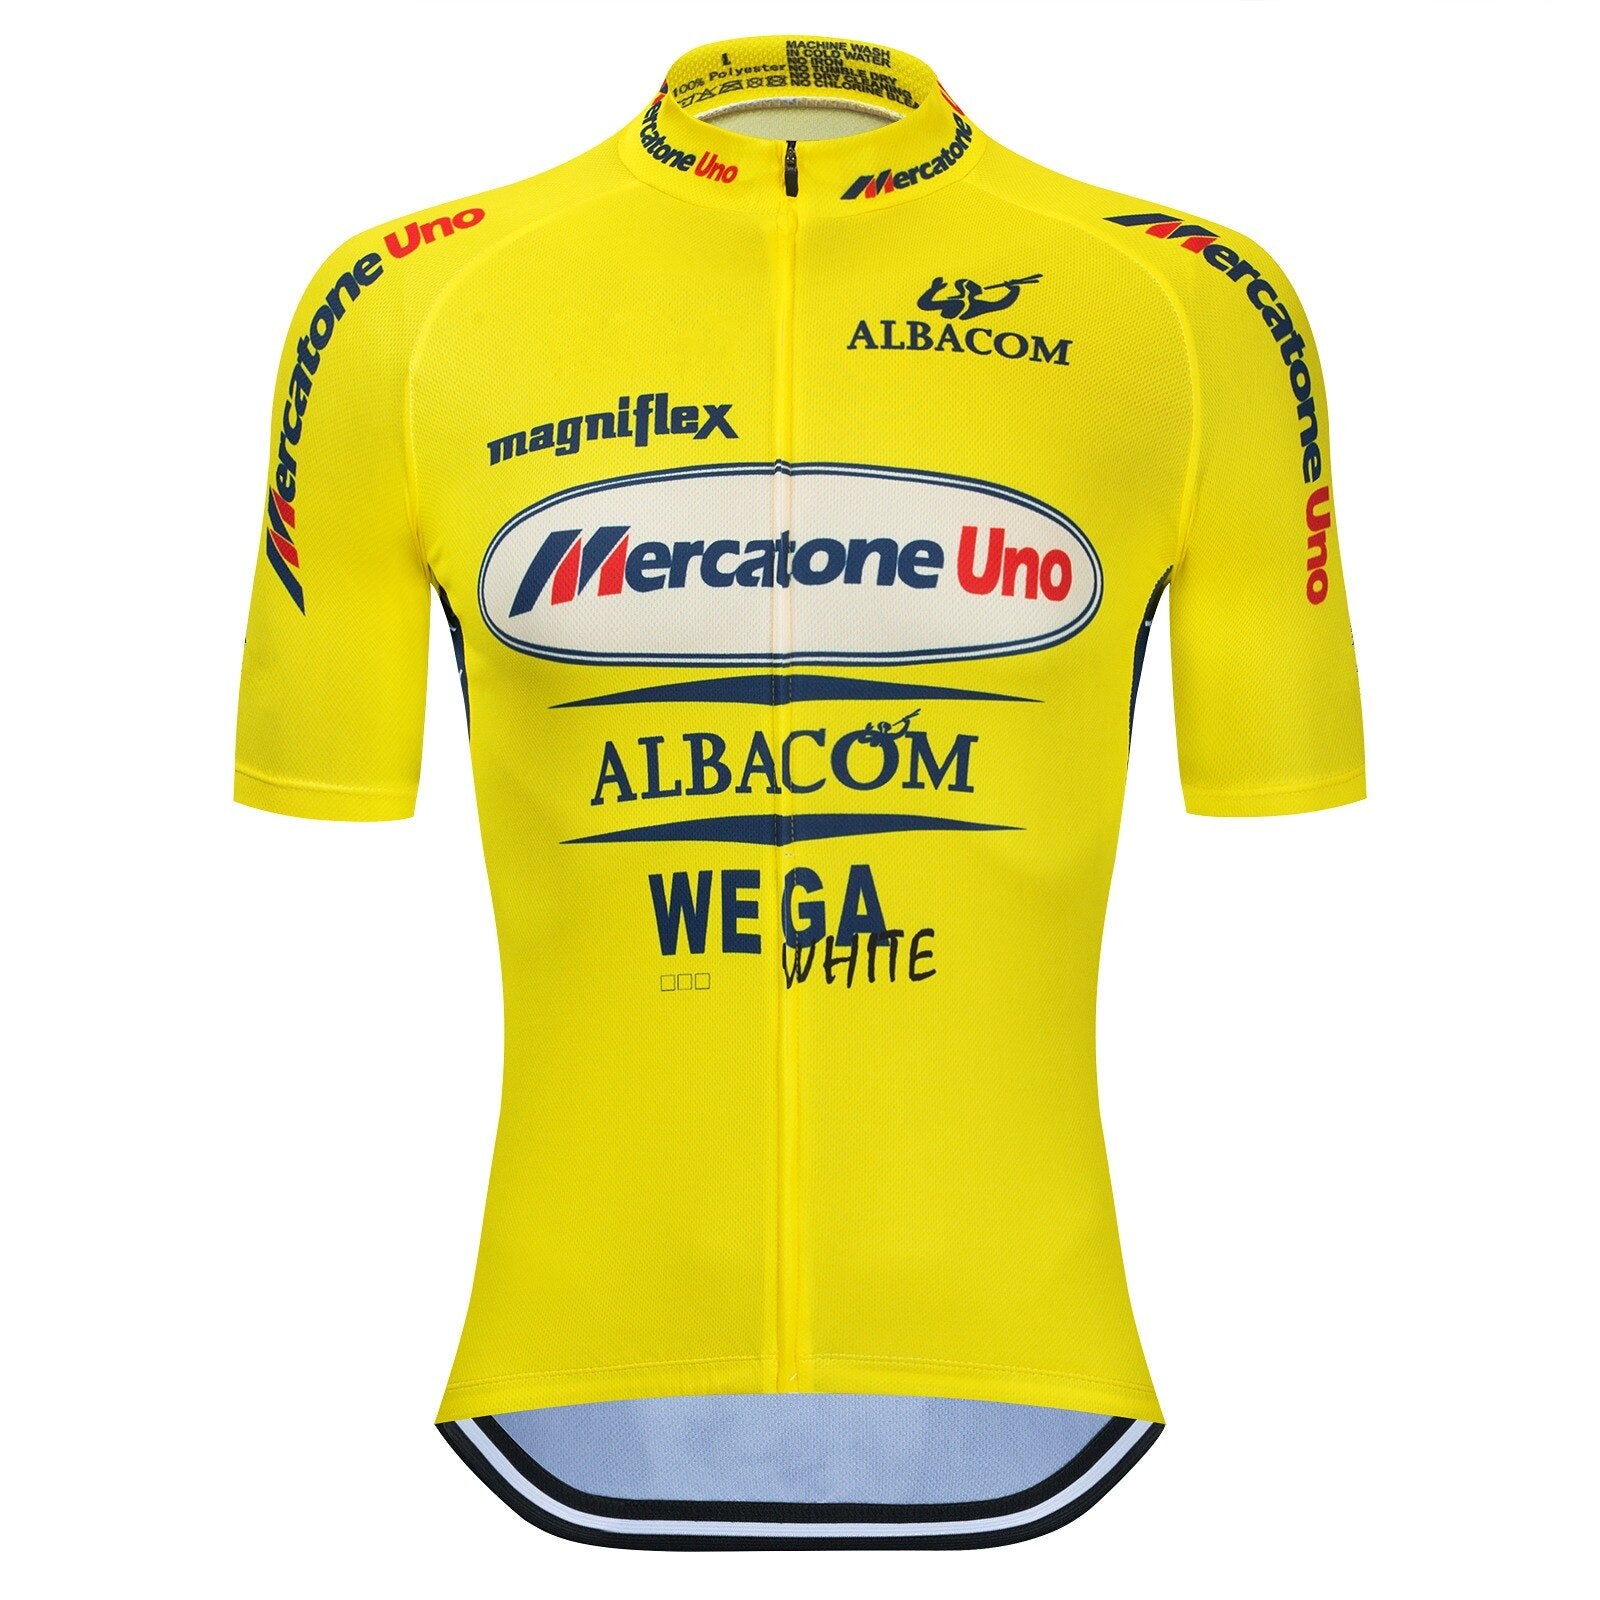 Marco Yellow Retro Cycling Jersey Short sleeved suit